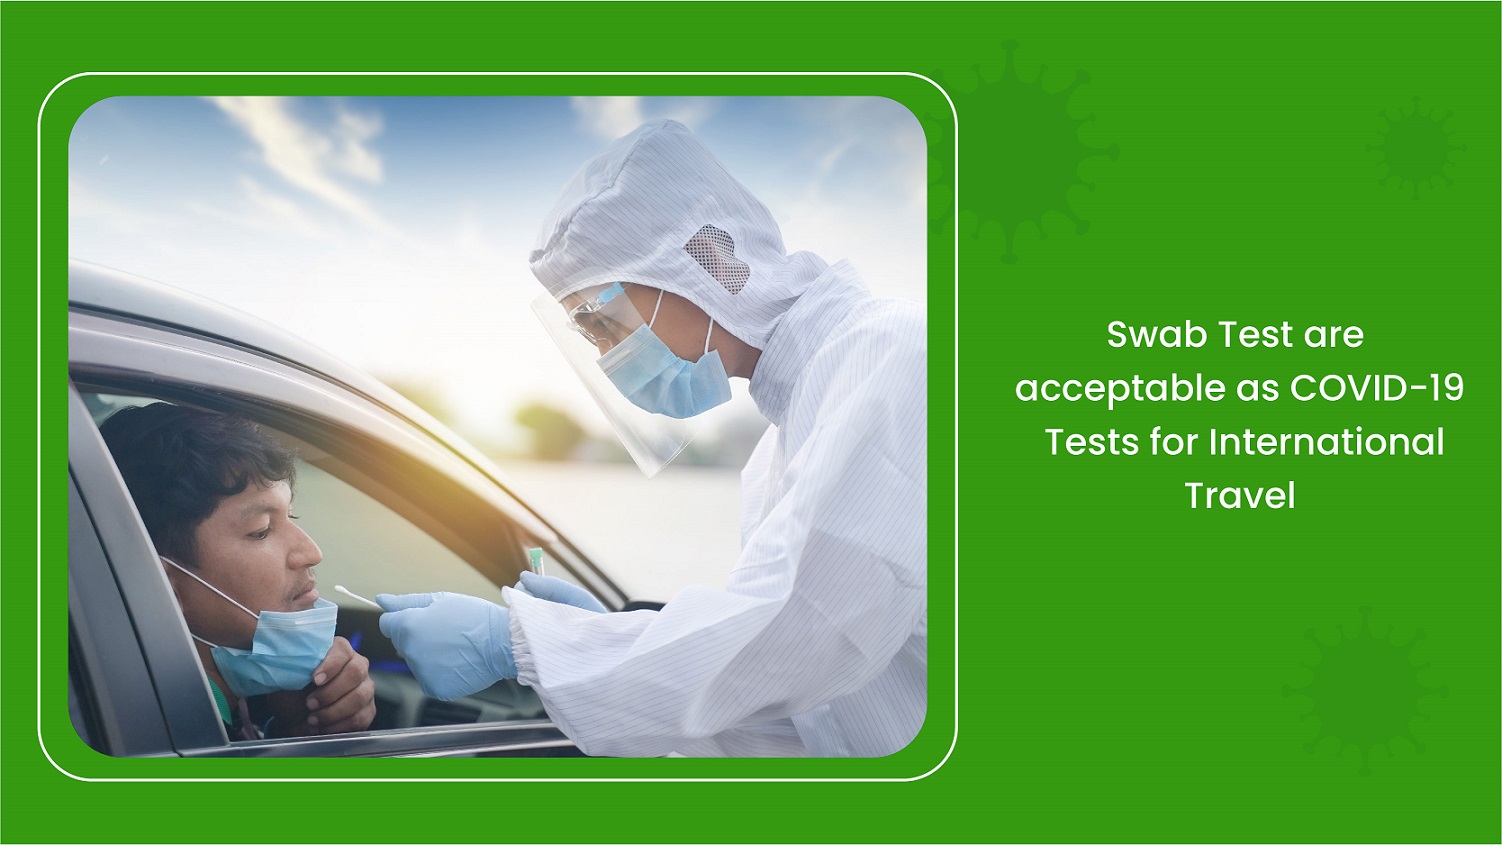 Swab Test are acceptable as COVID-19 Tests for International Travel 